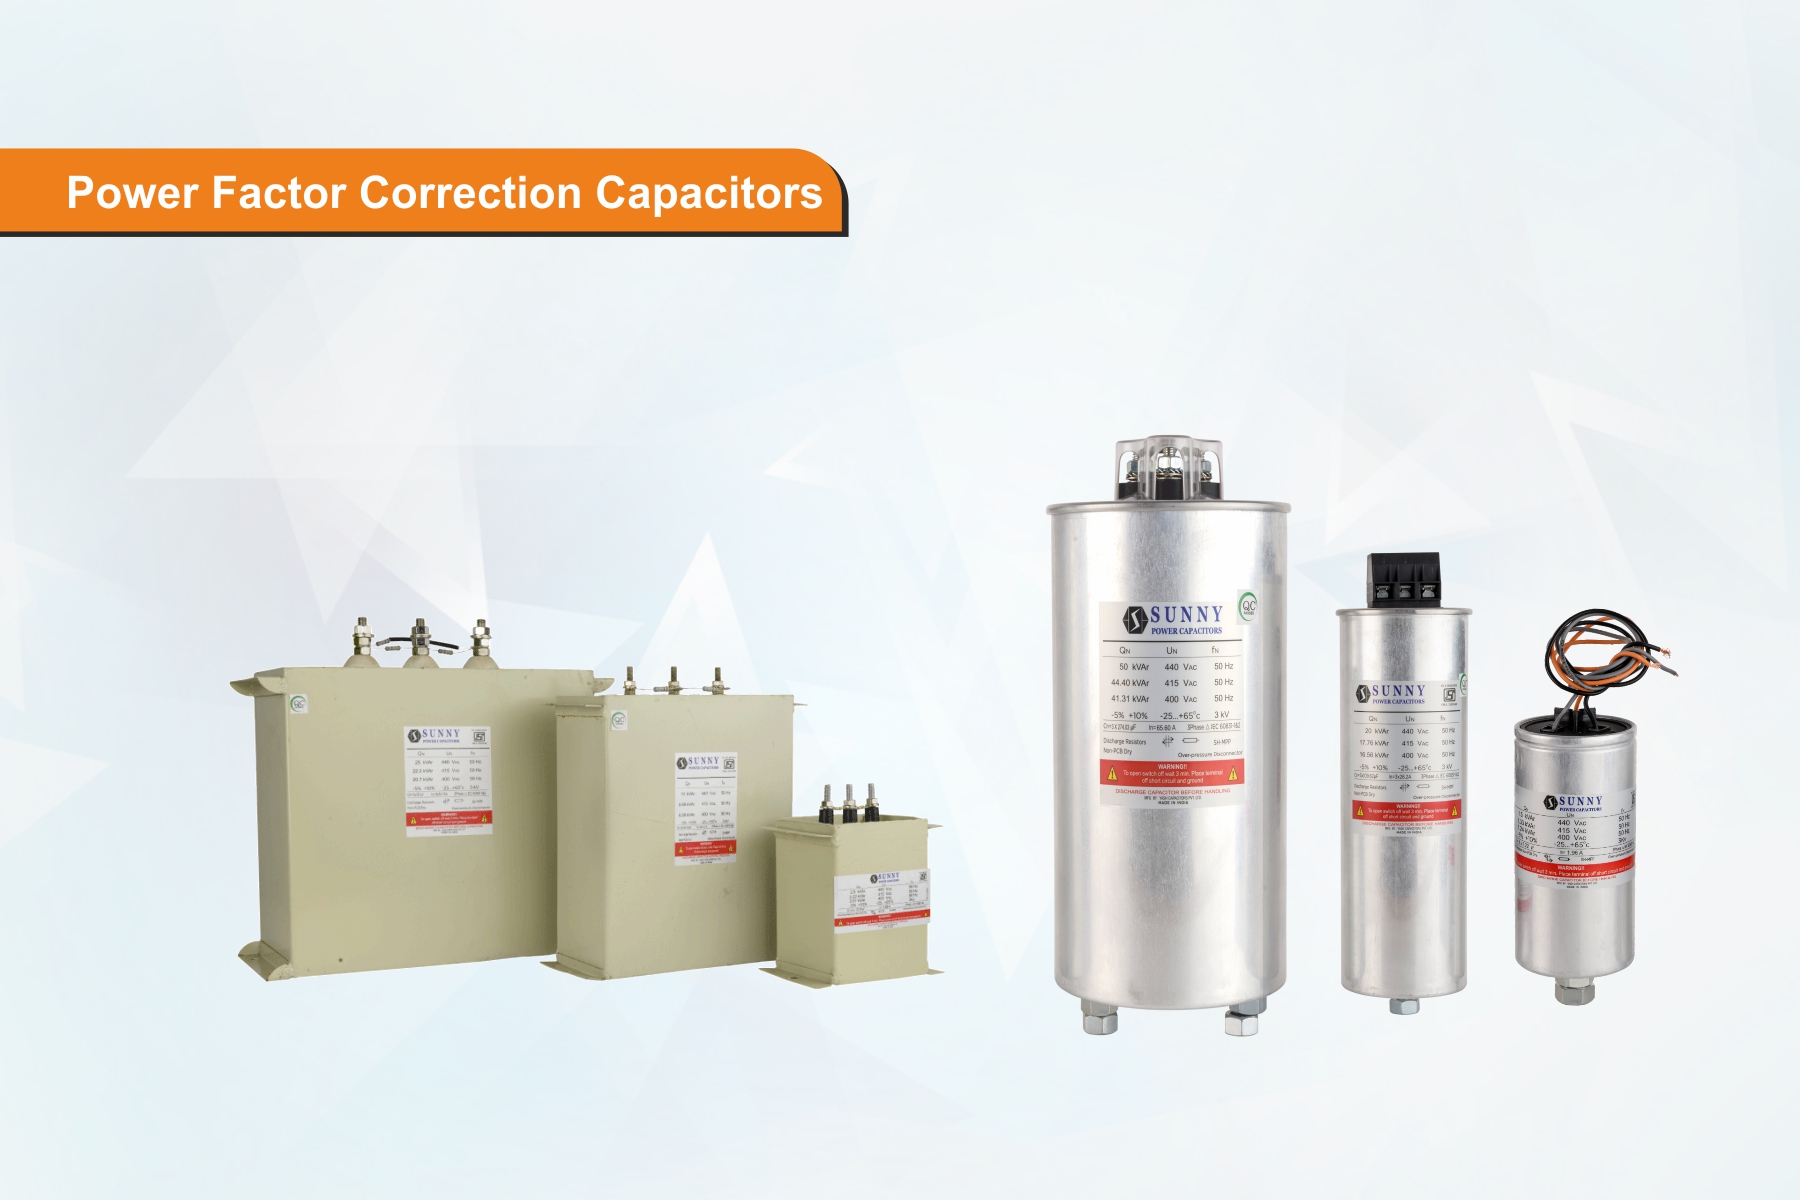 Reactive power compensation products